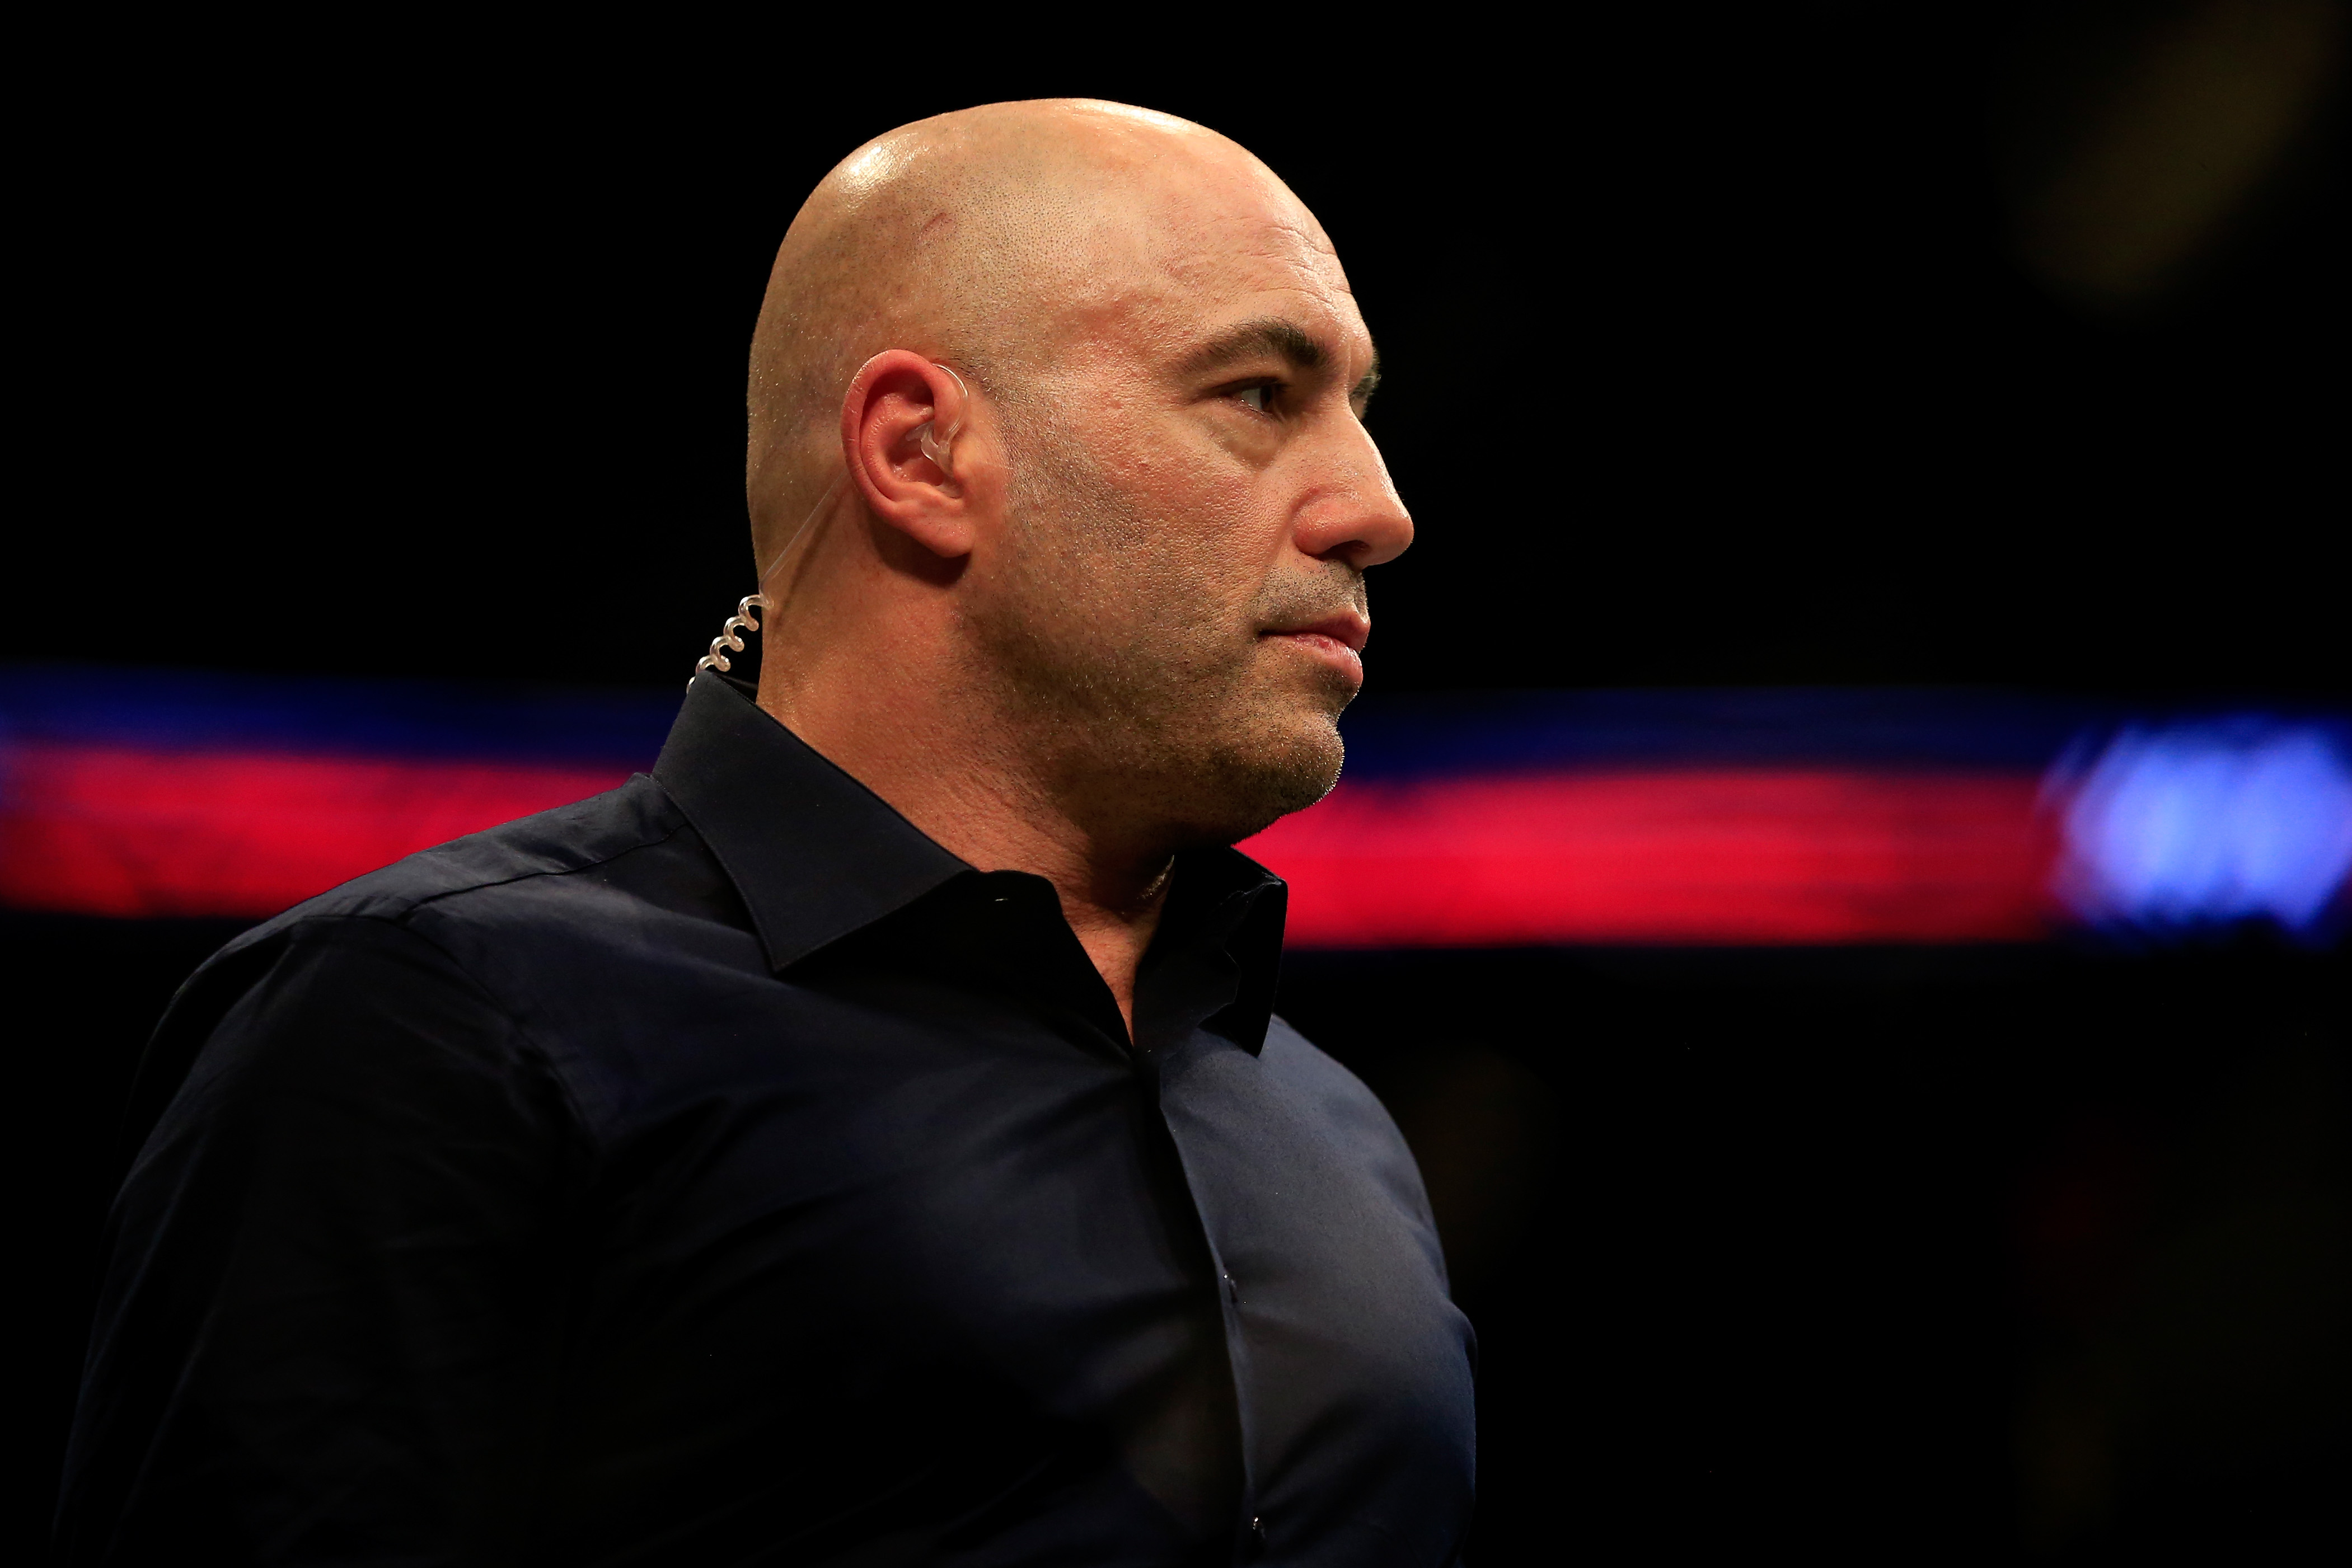 Joe Rogan at the Prudential Center in Newark, New Jersey. (Photo by Alex Trautwig/Getty Images)